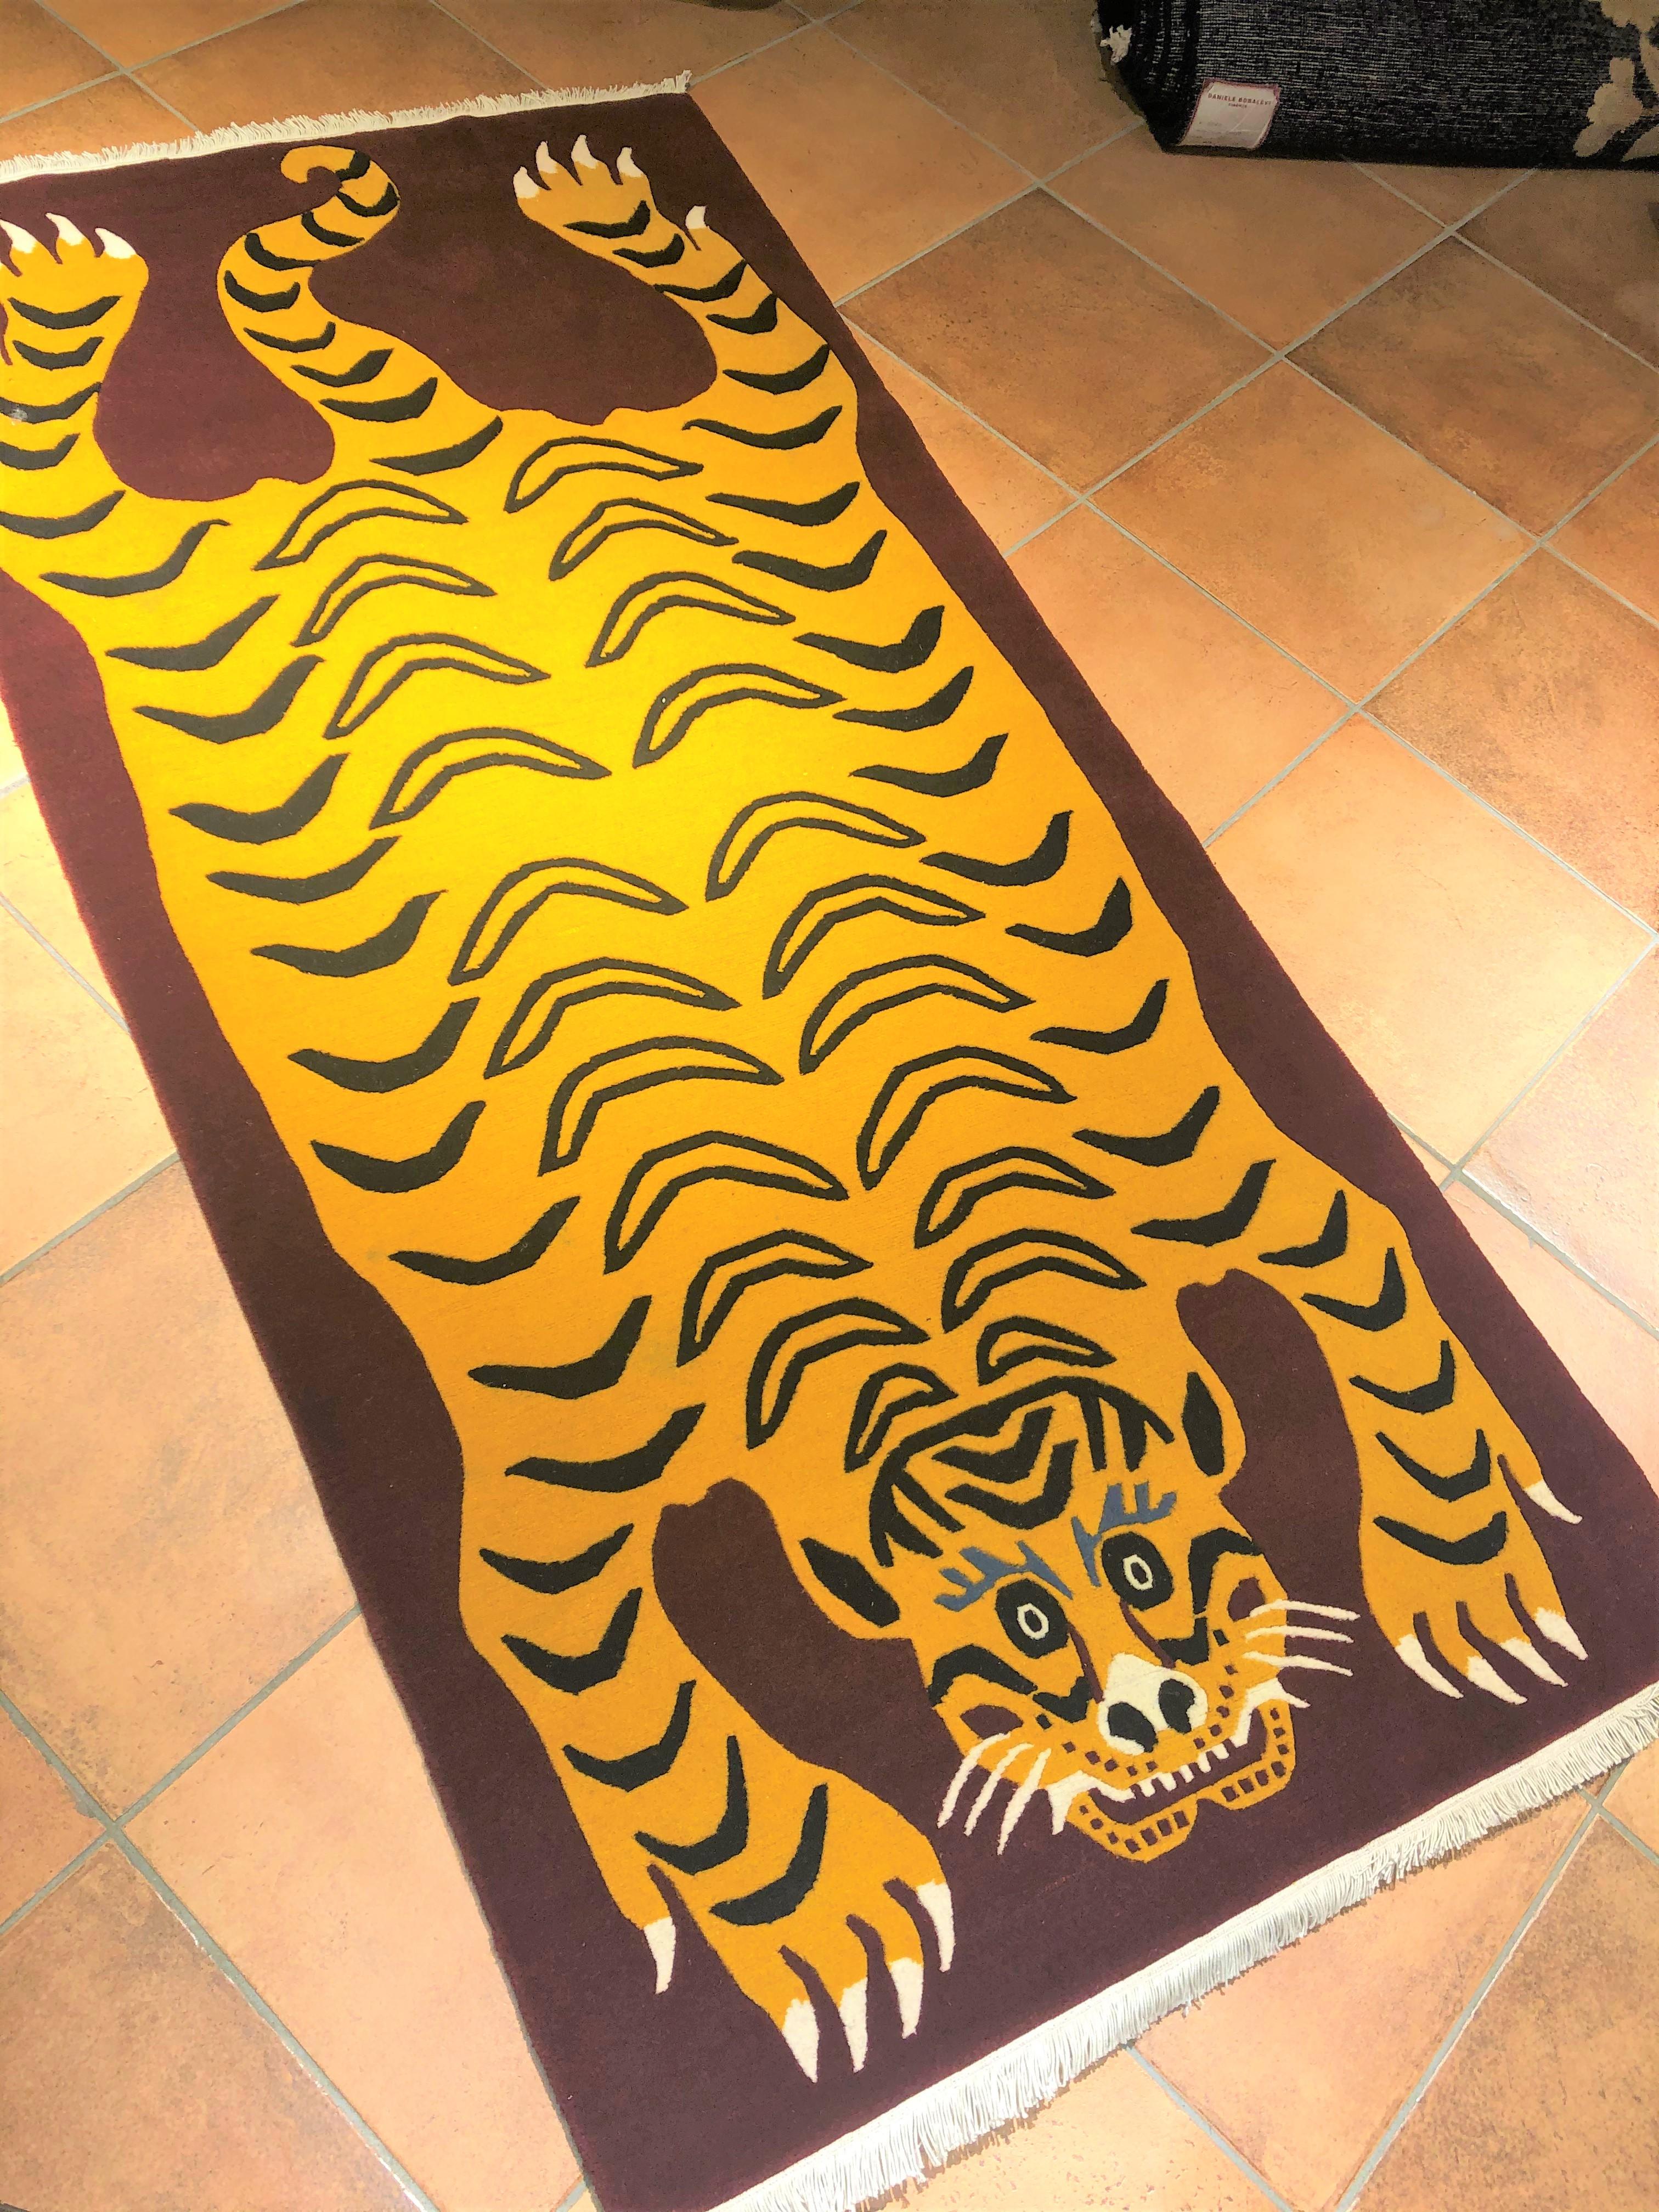 Nepalese production carpet, knotted with hand-spun wool with Tibetan knot. The background is purple-red and the tiger represented has the back richly decorated in the traditional yellow fur of these felines. The face expresses strength but at the